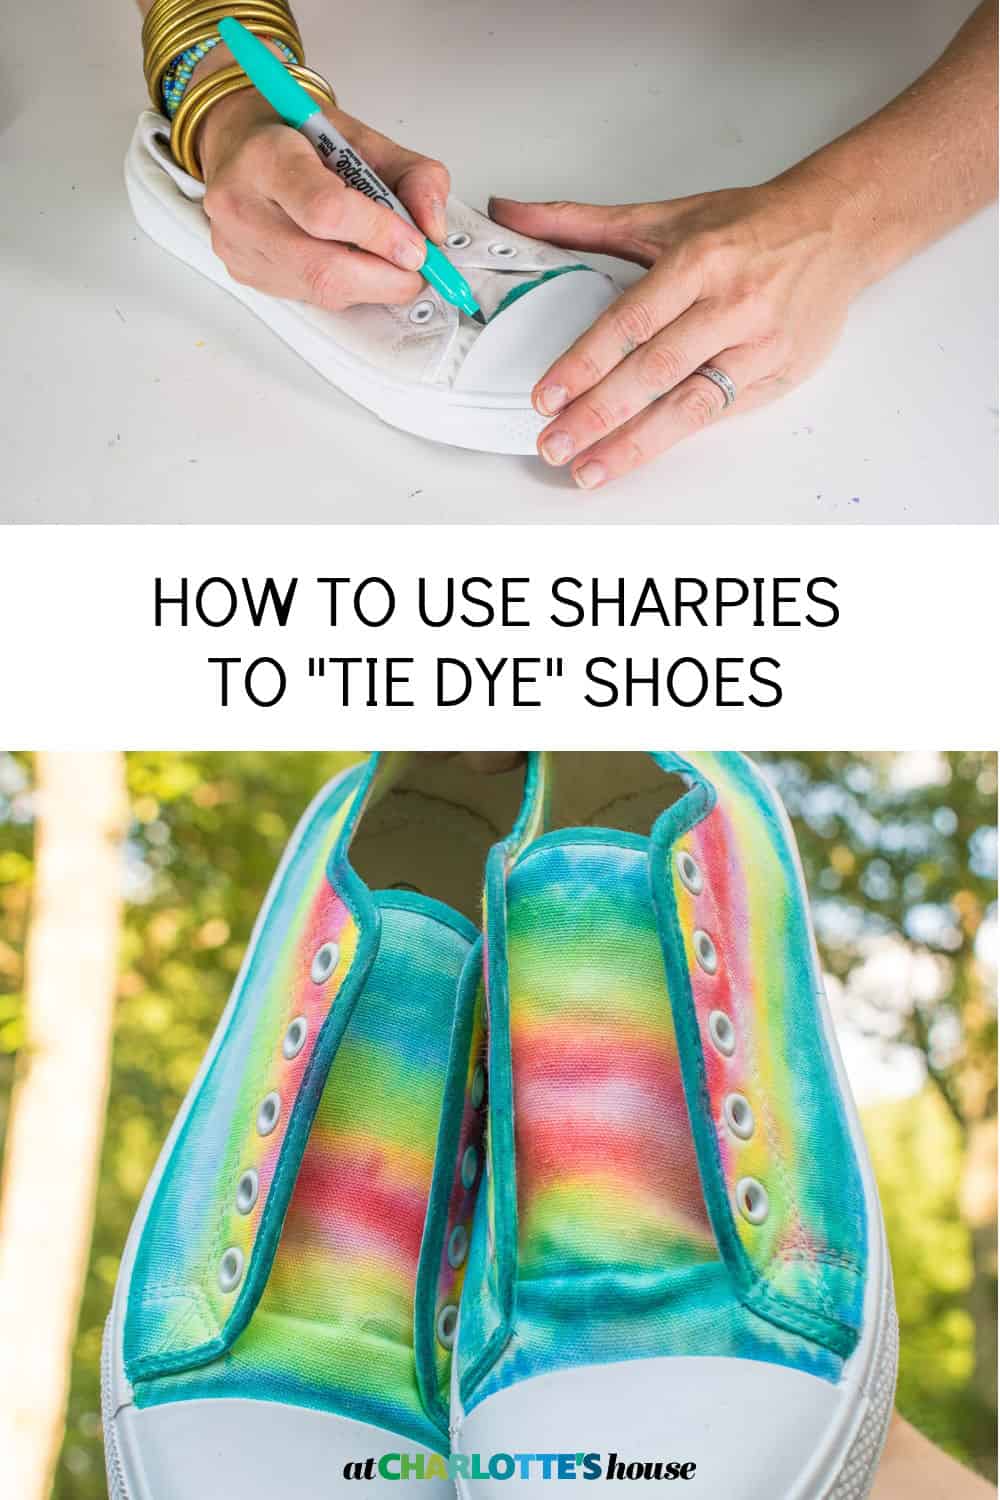 How to Tie Dye Shoes - The Kitchen Table Classroom